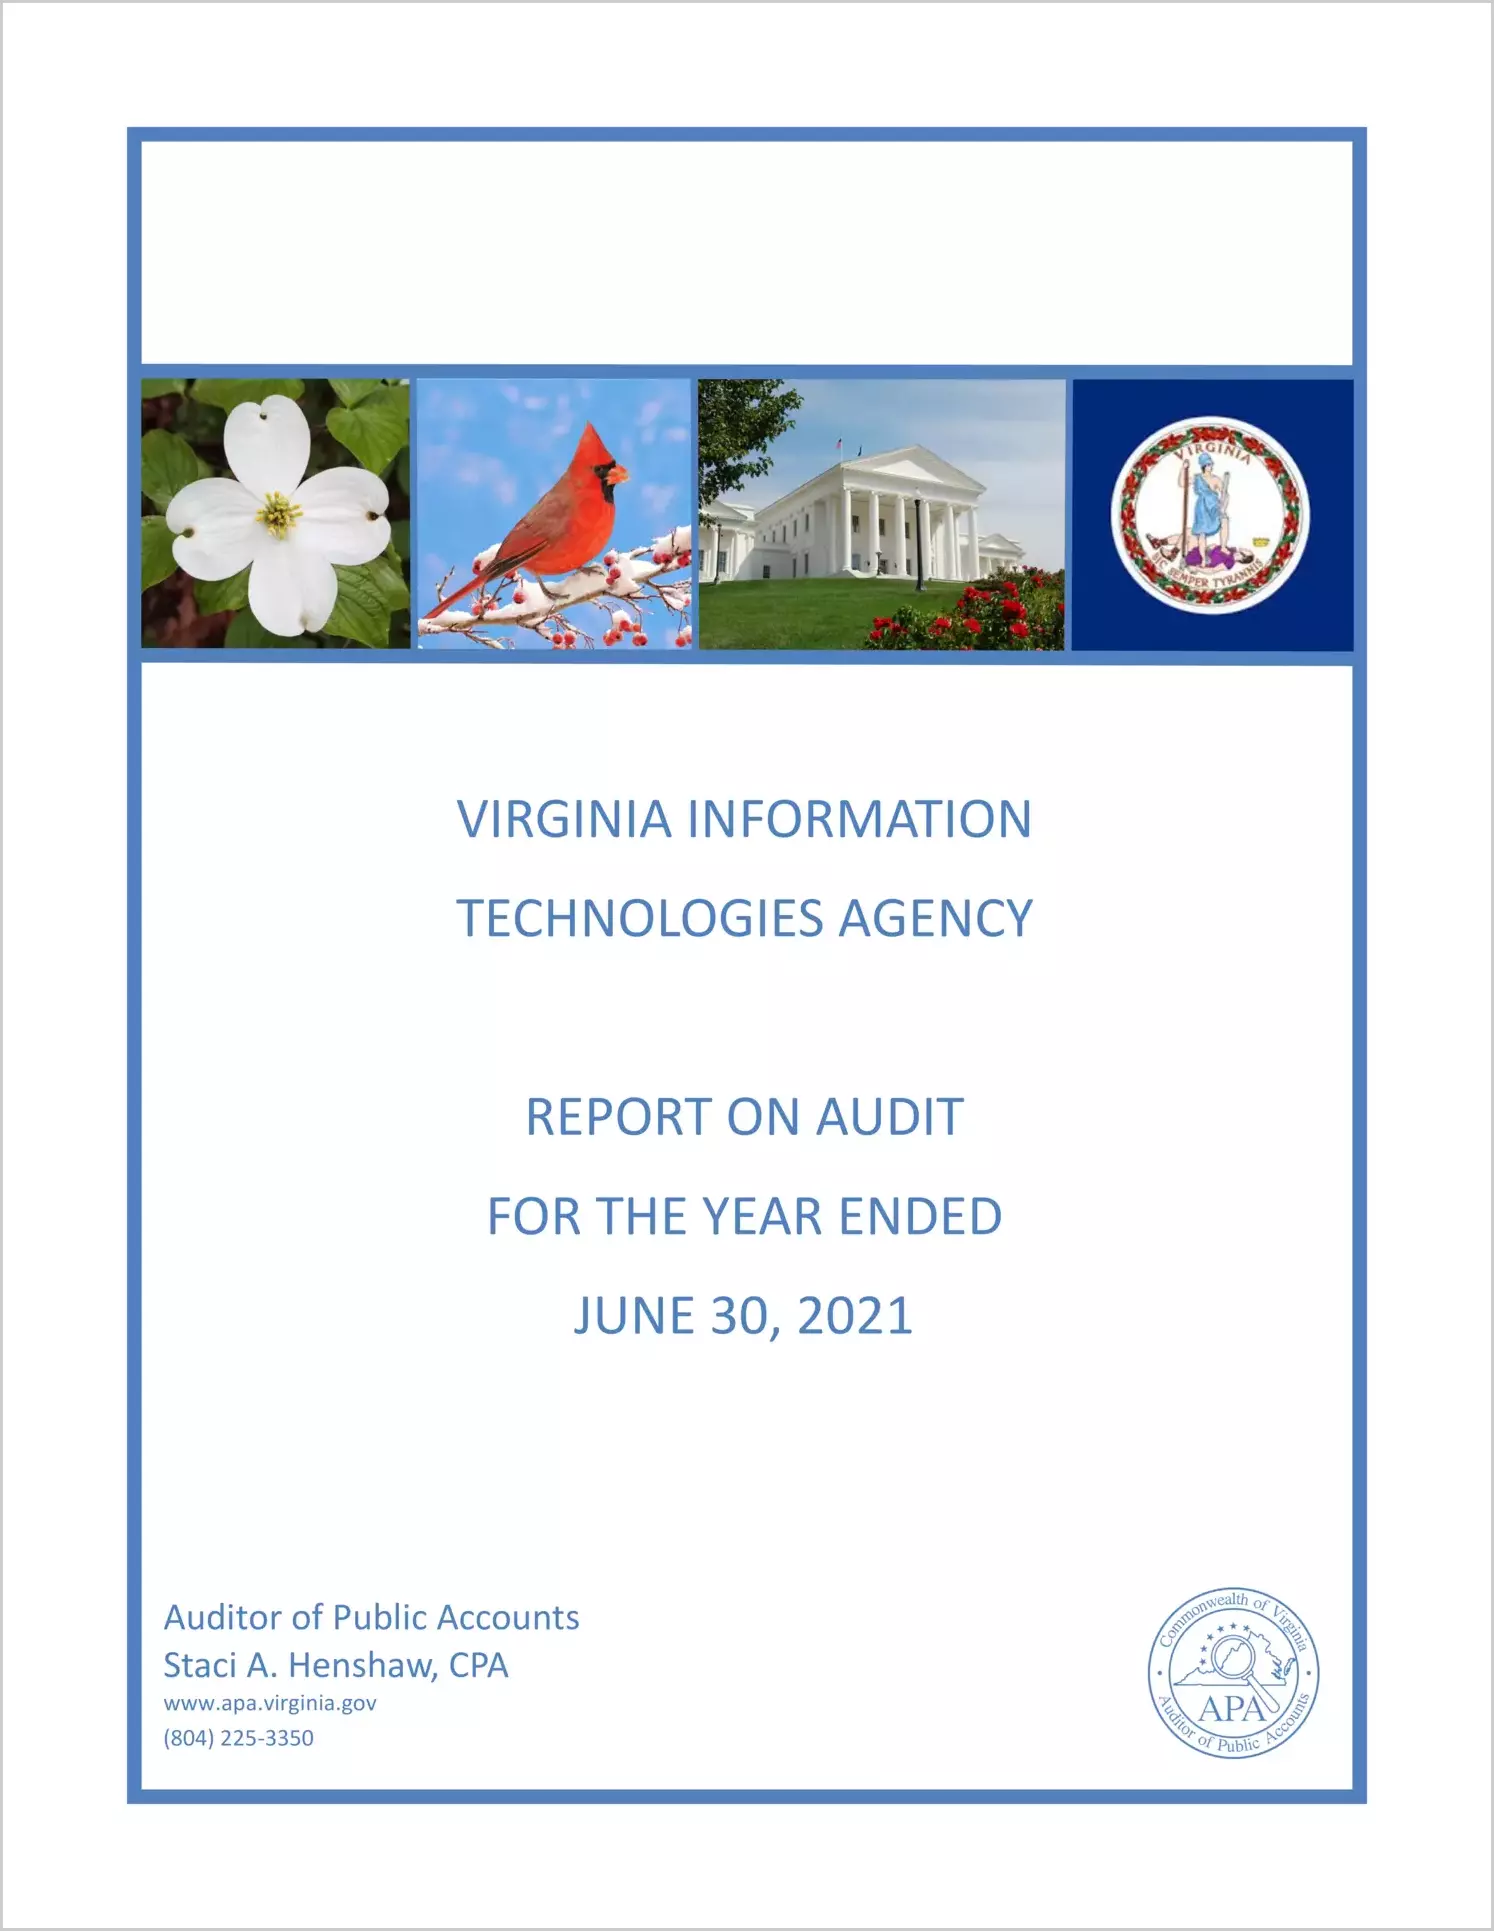 Virginia Information Technologies Agency for the year ended June 30, 2021